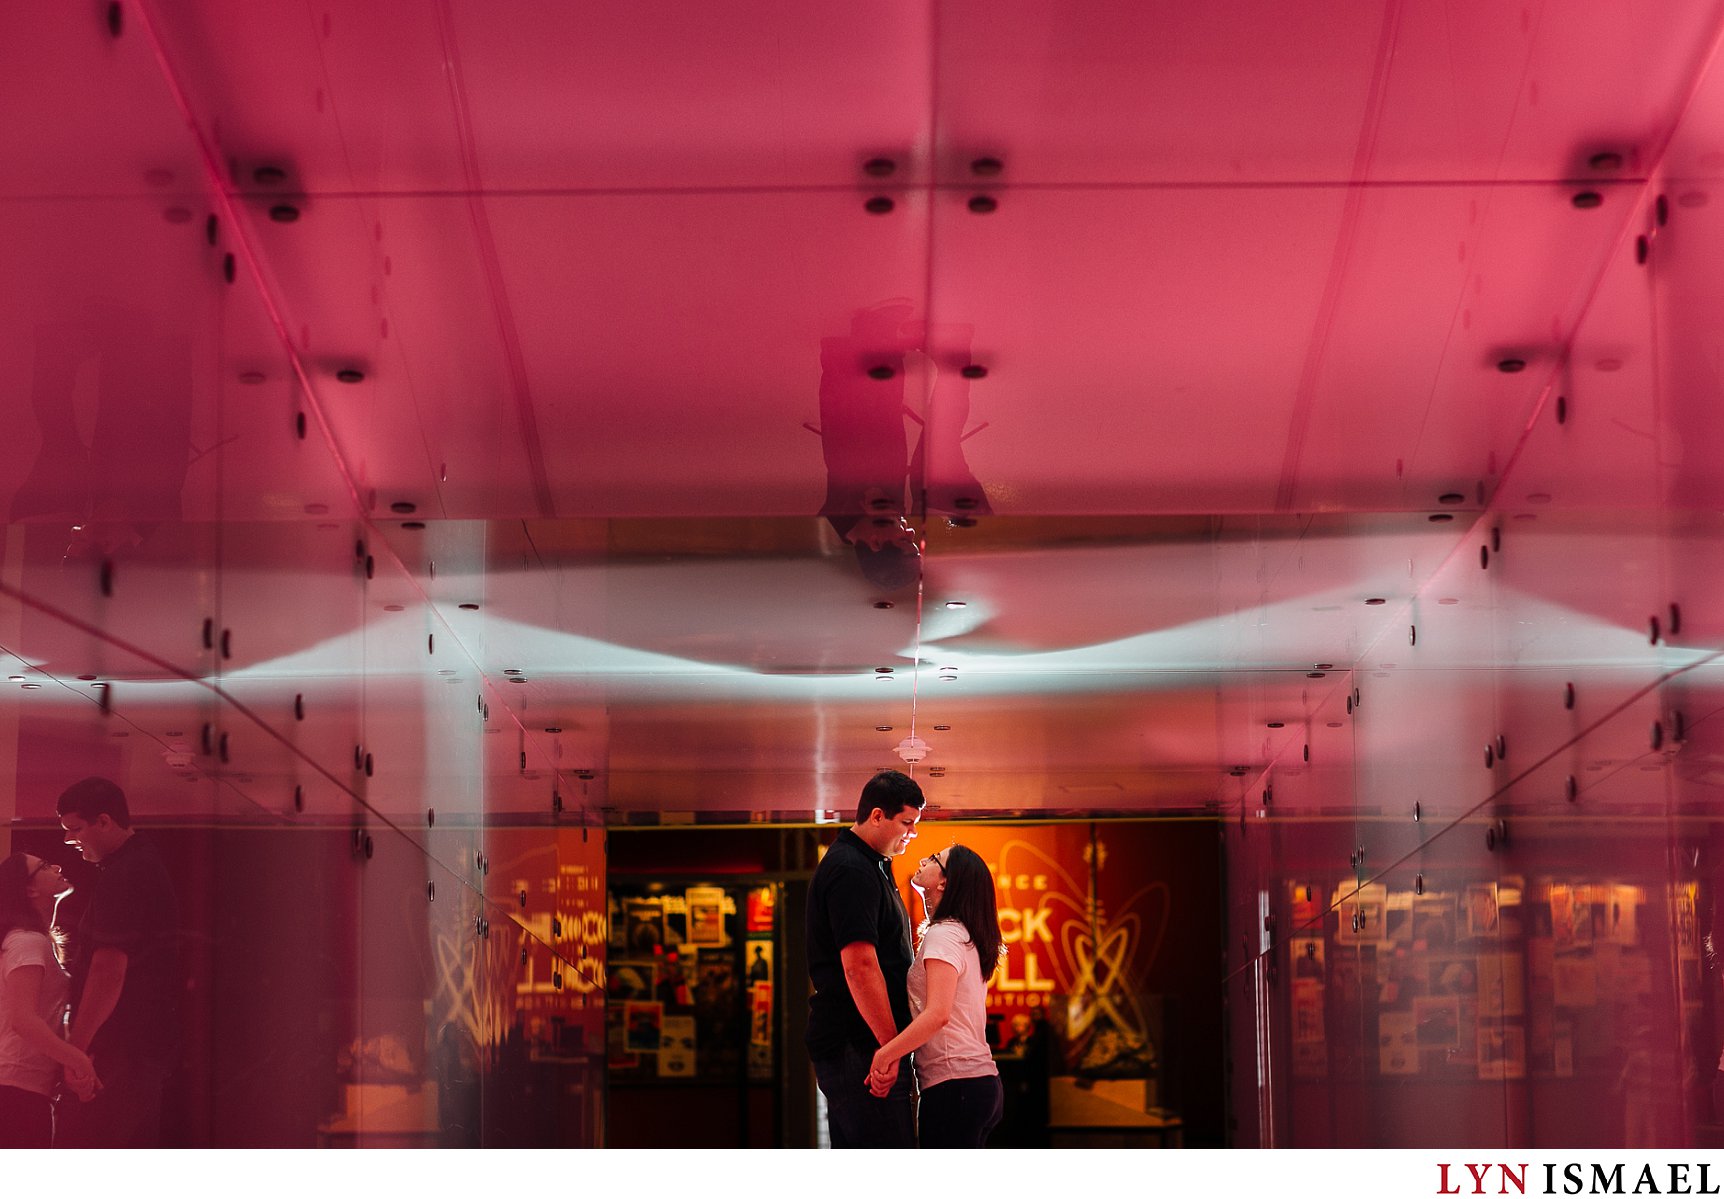 Toronto wedding photographer shares images from Ellie and Matt's engagement session at the Ontario Science Centre